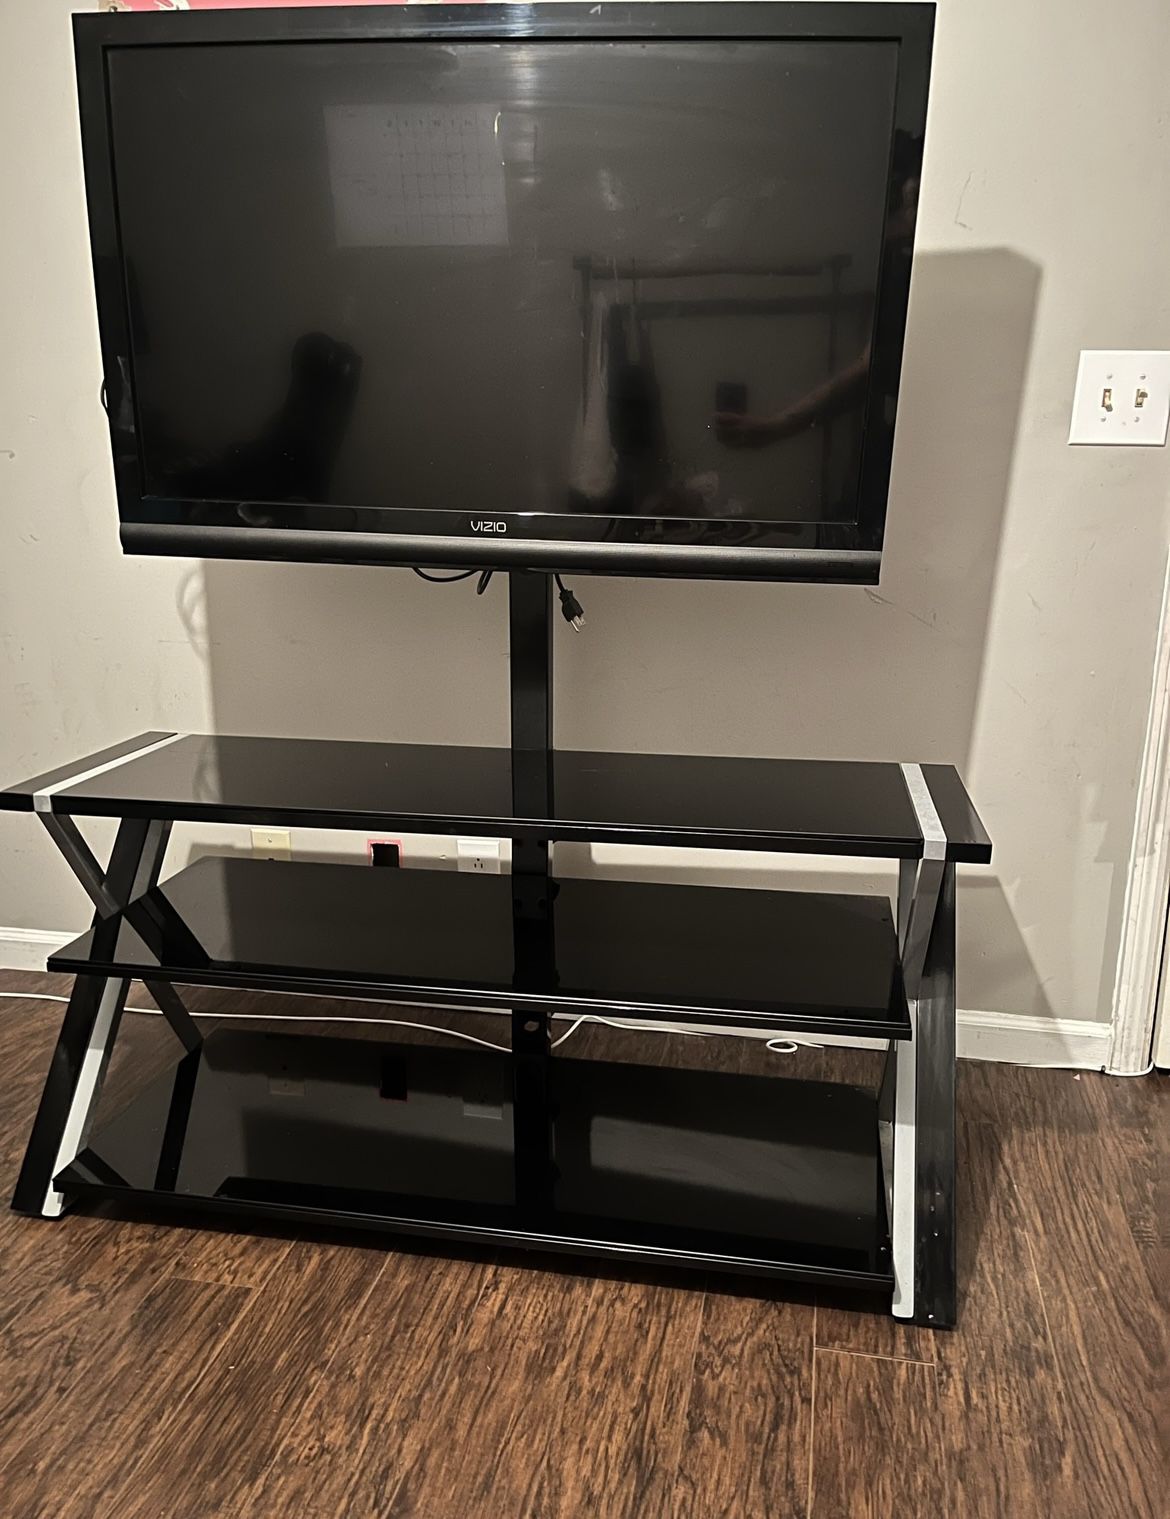 TV And Stand 